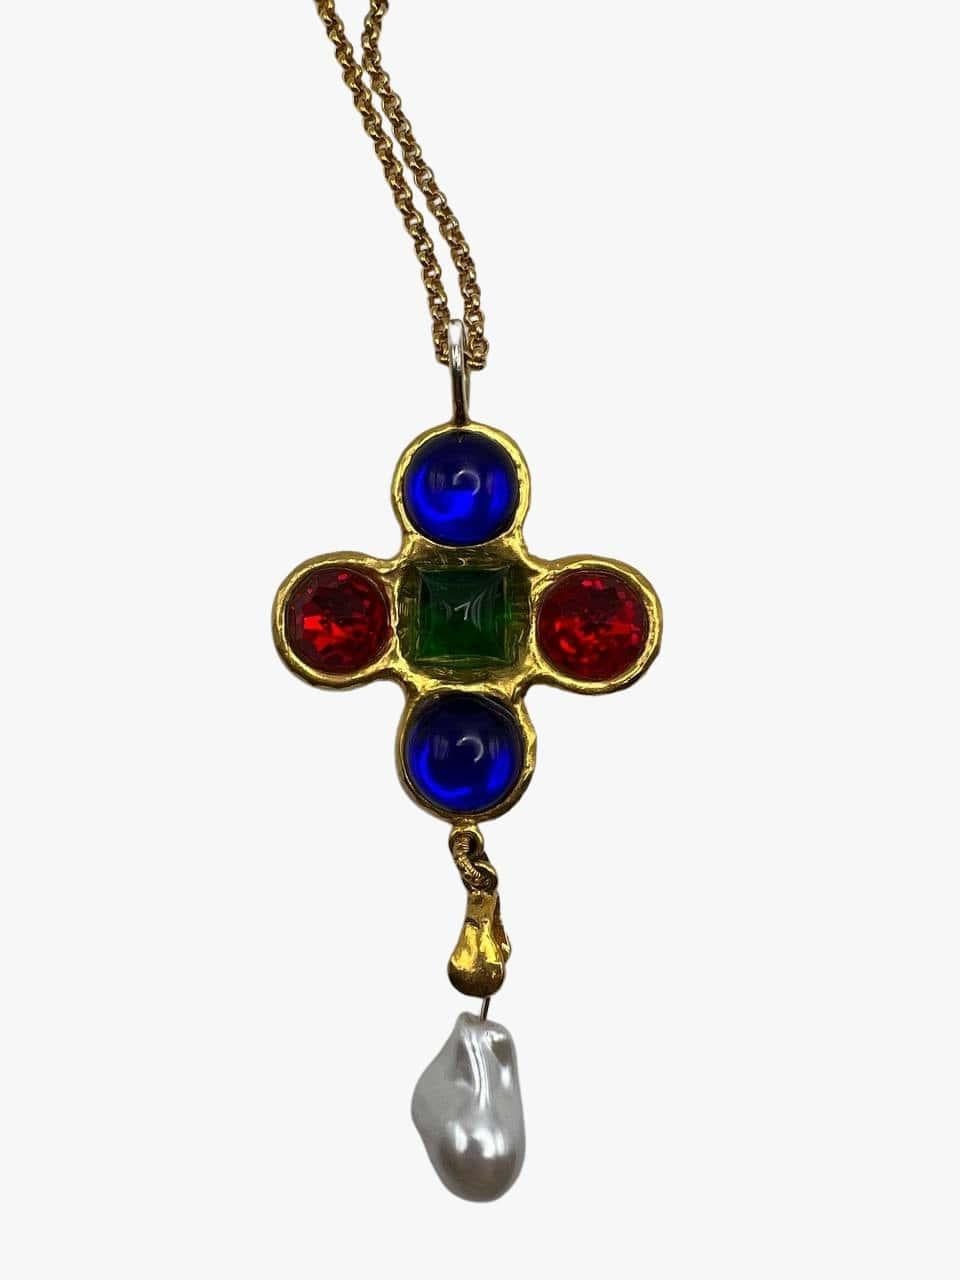 Baroque Vintage Byzantine style Yves Saint Laurent cross pendant with cabochons, 1980s